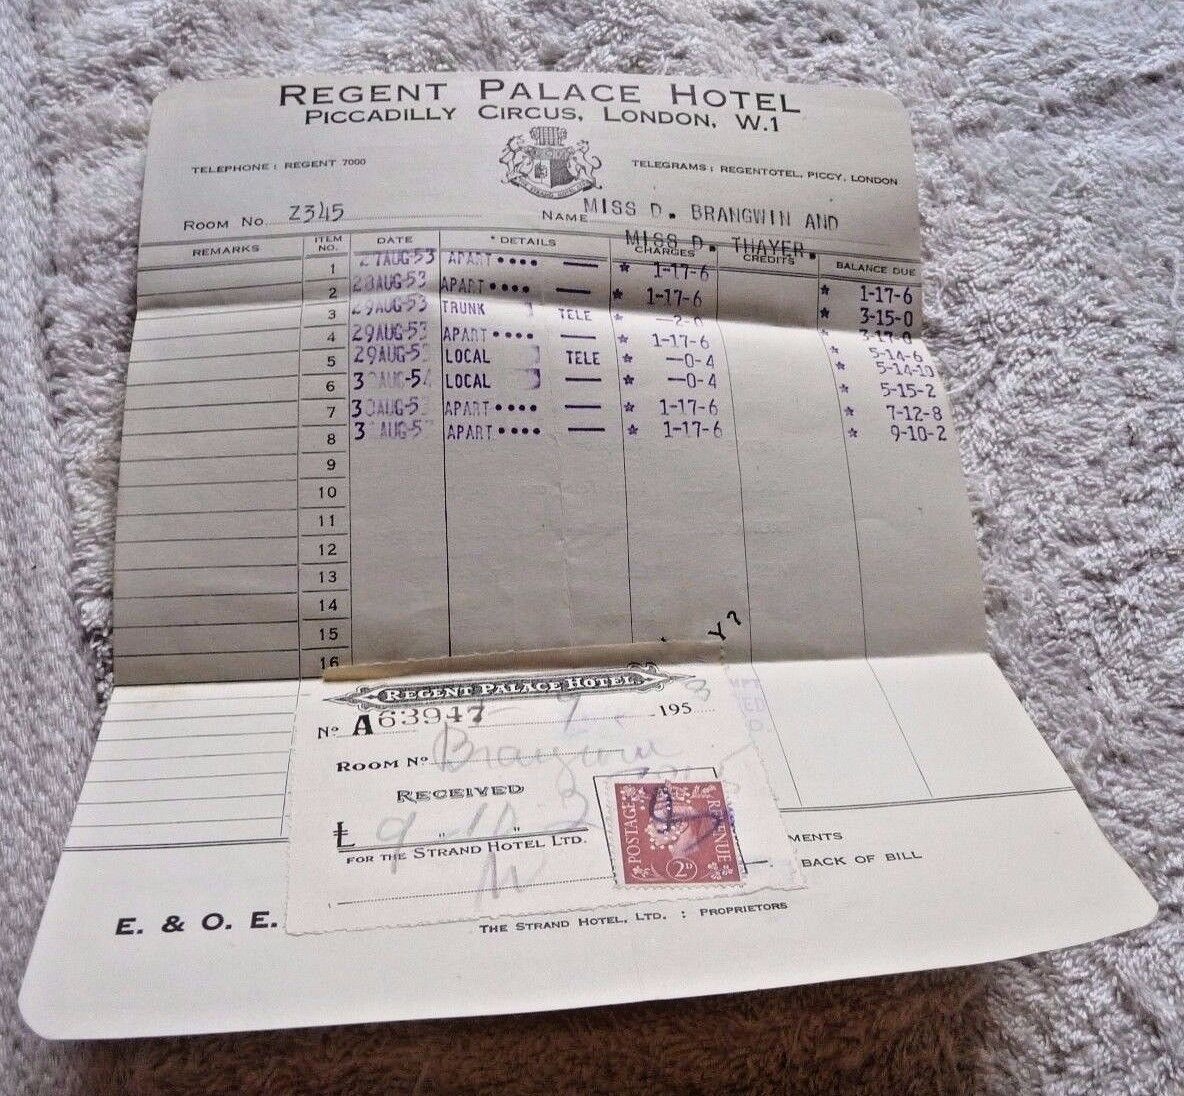 VINTAGE INVOICE REGENT PALACE HOTEL w/STAMP PICCADILLY CIRCUS LONDON 1953